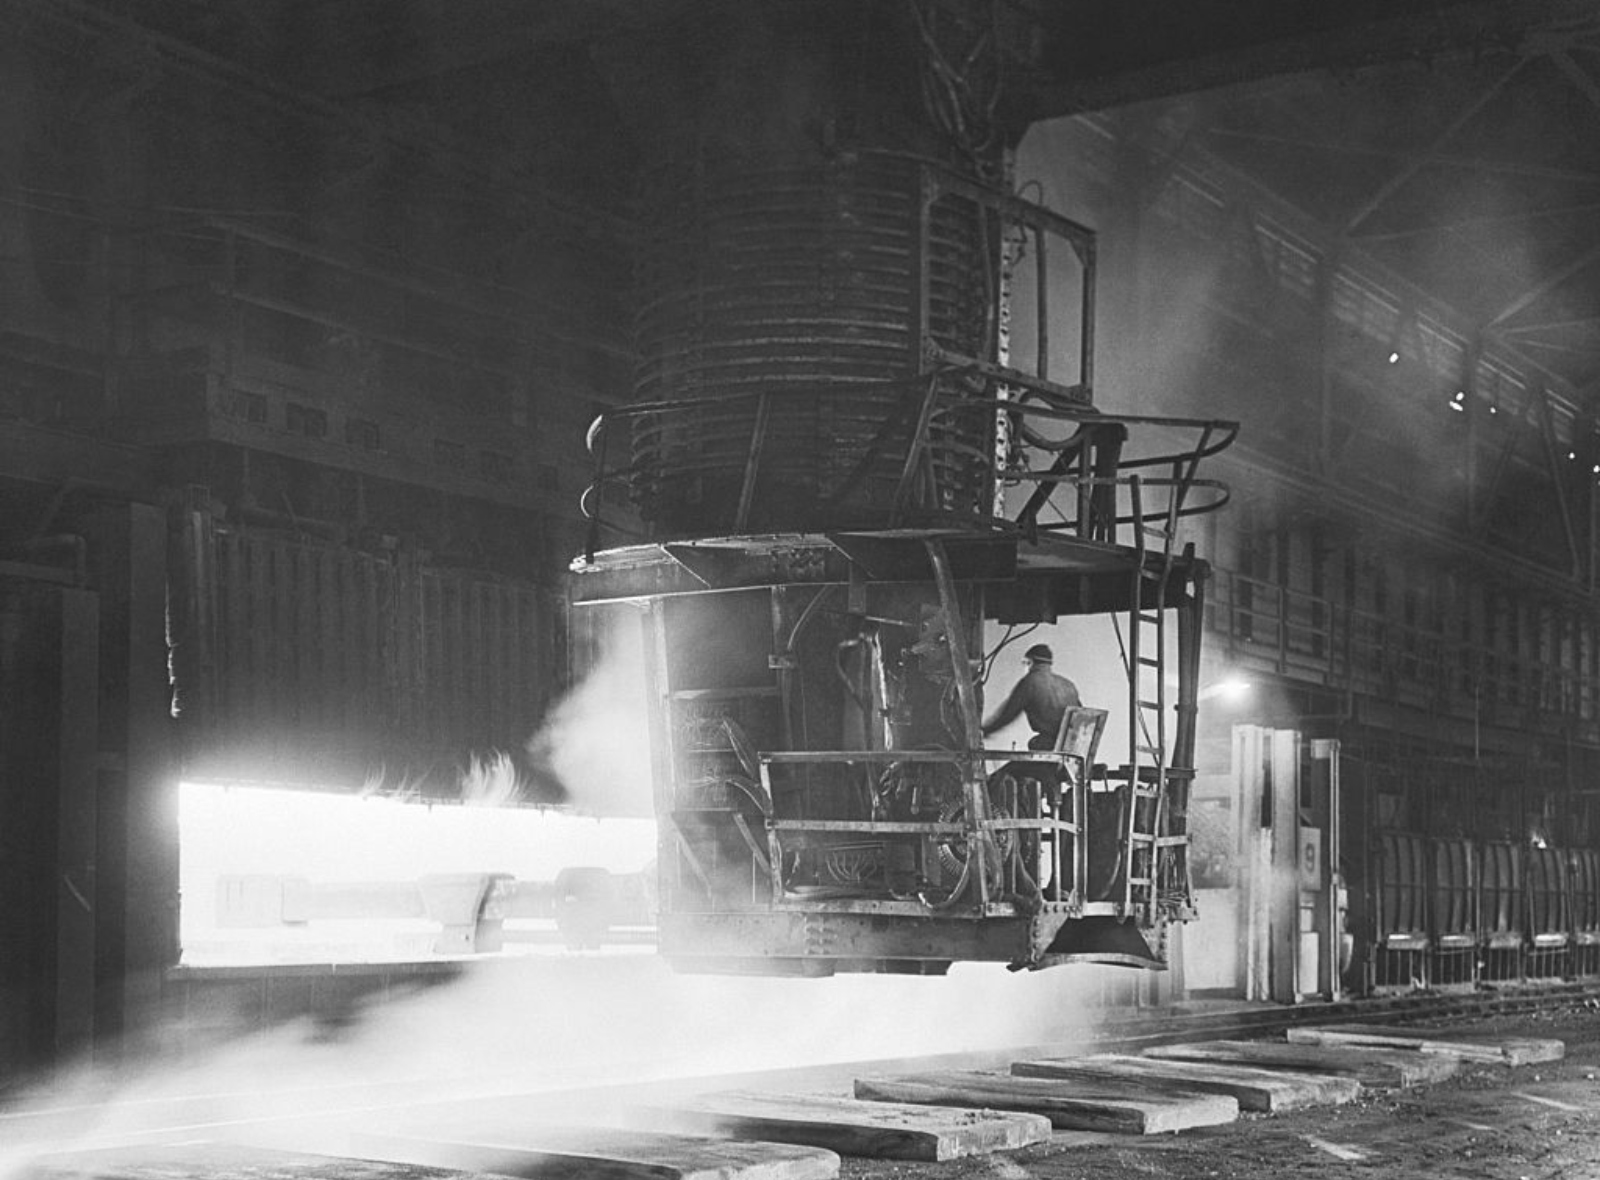 A man operates a furnace at US Steel's Gary Works in January 1945